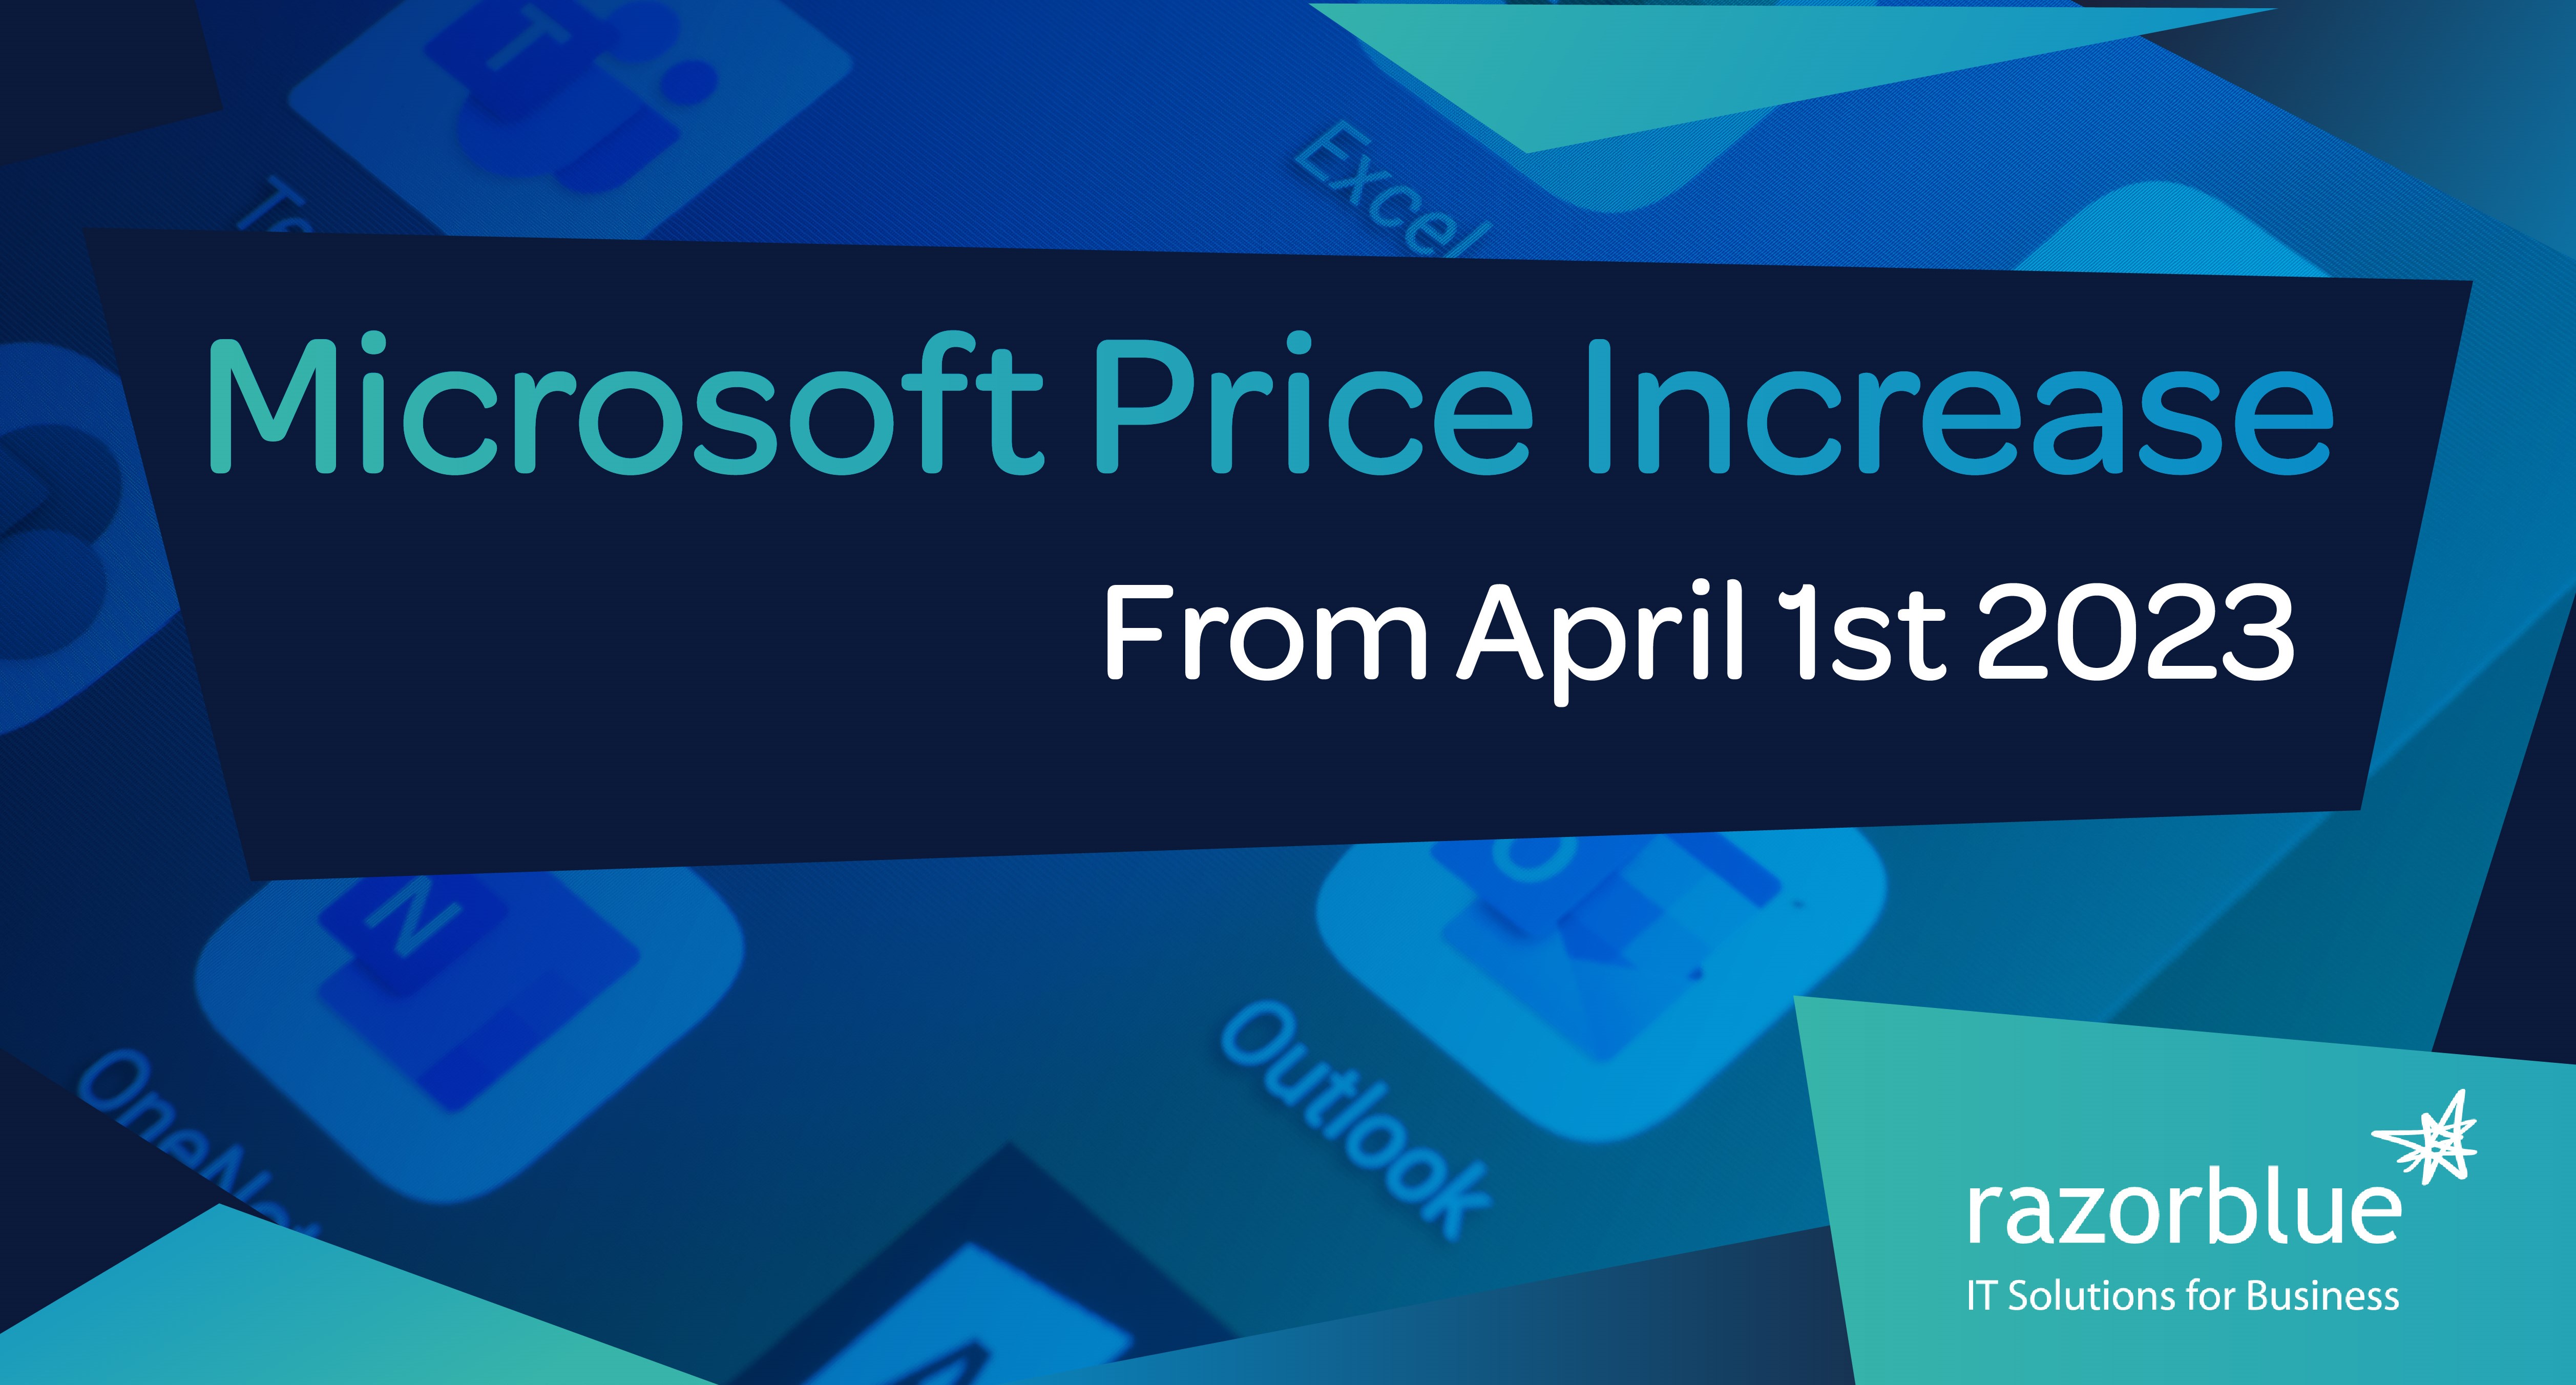 Microsoft are increasing Cloud pricing in the UK by 9 as of April 1st